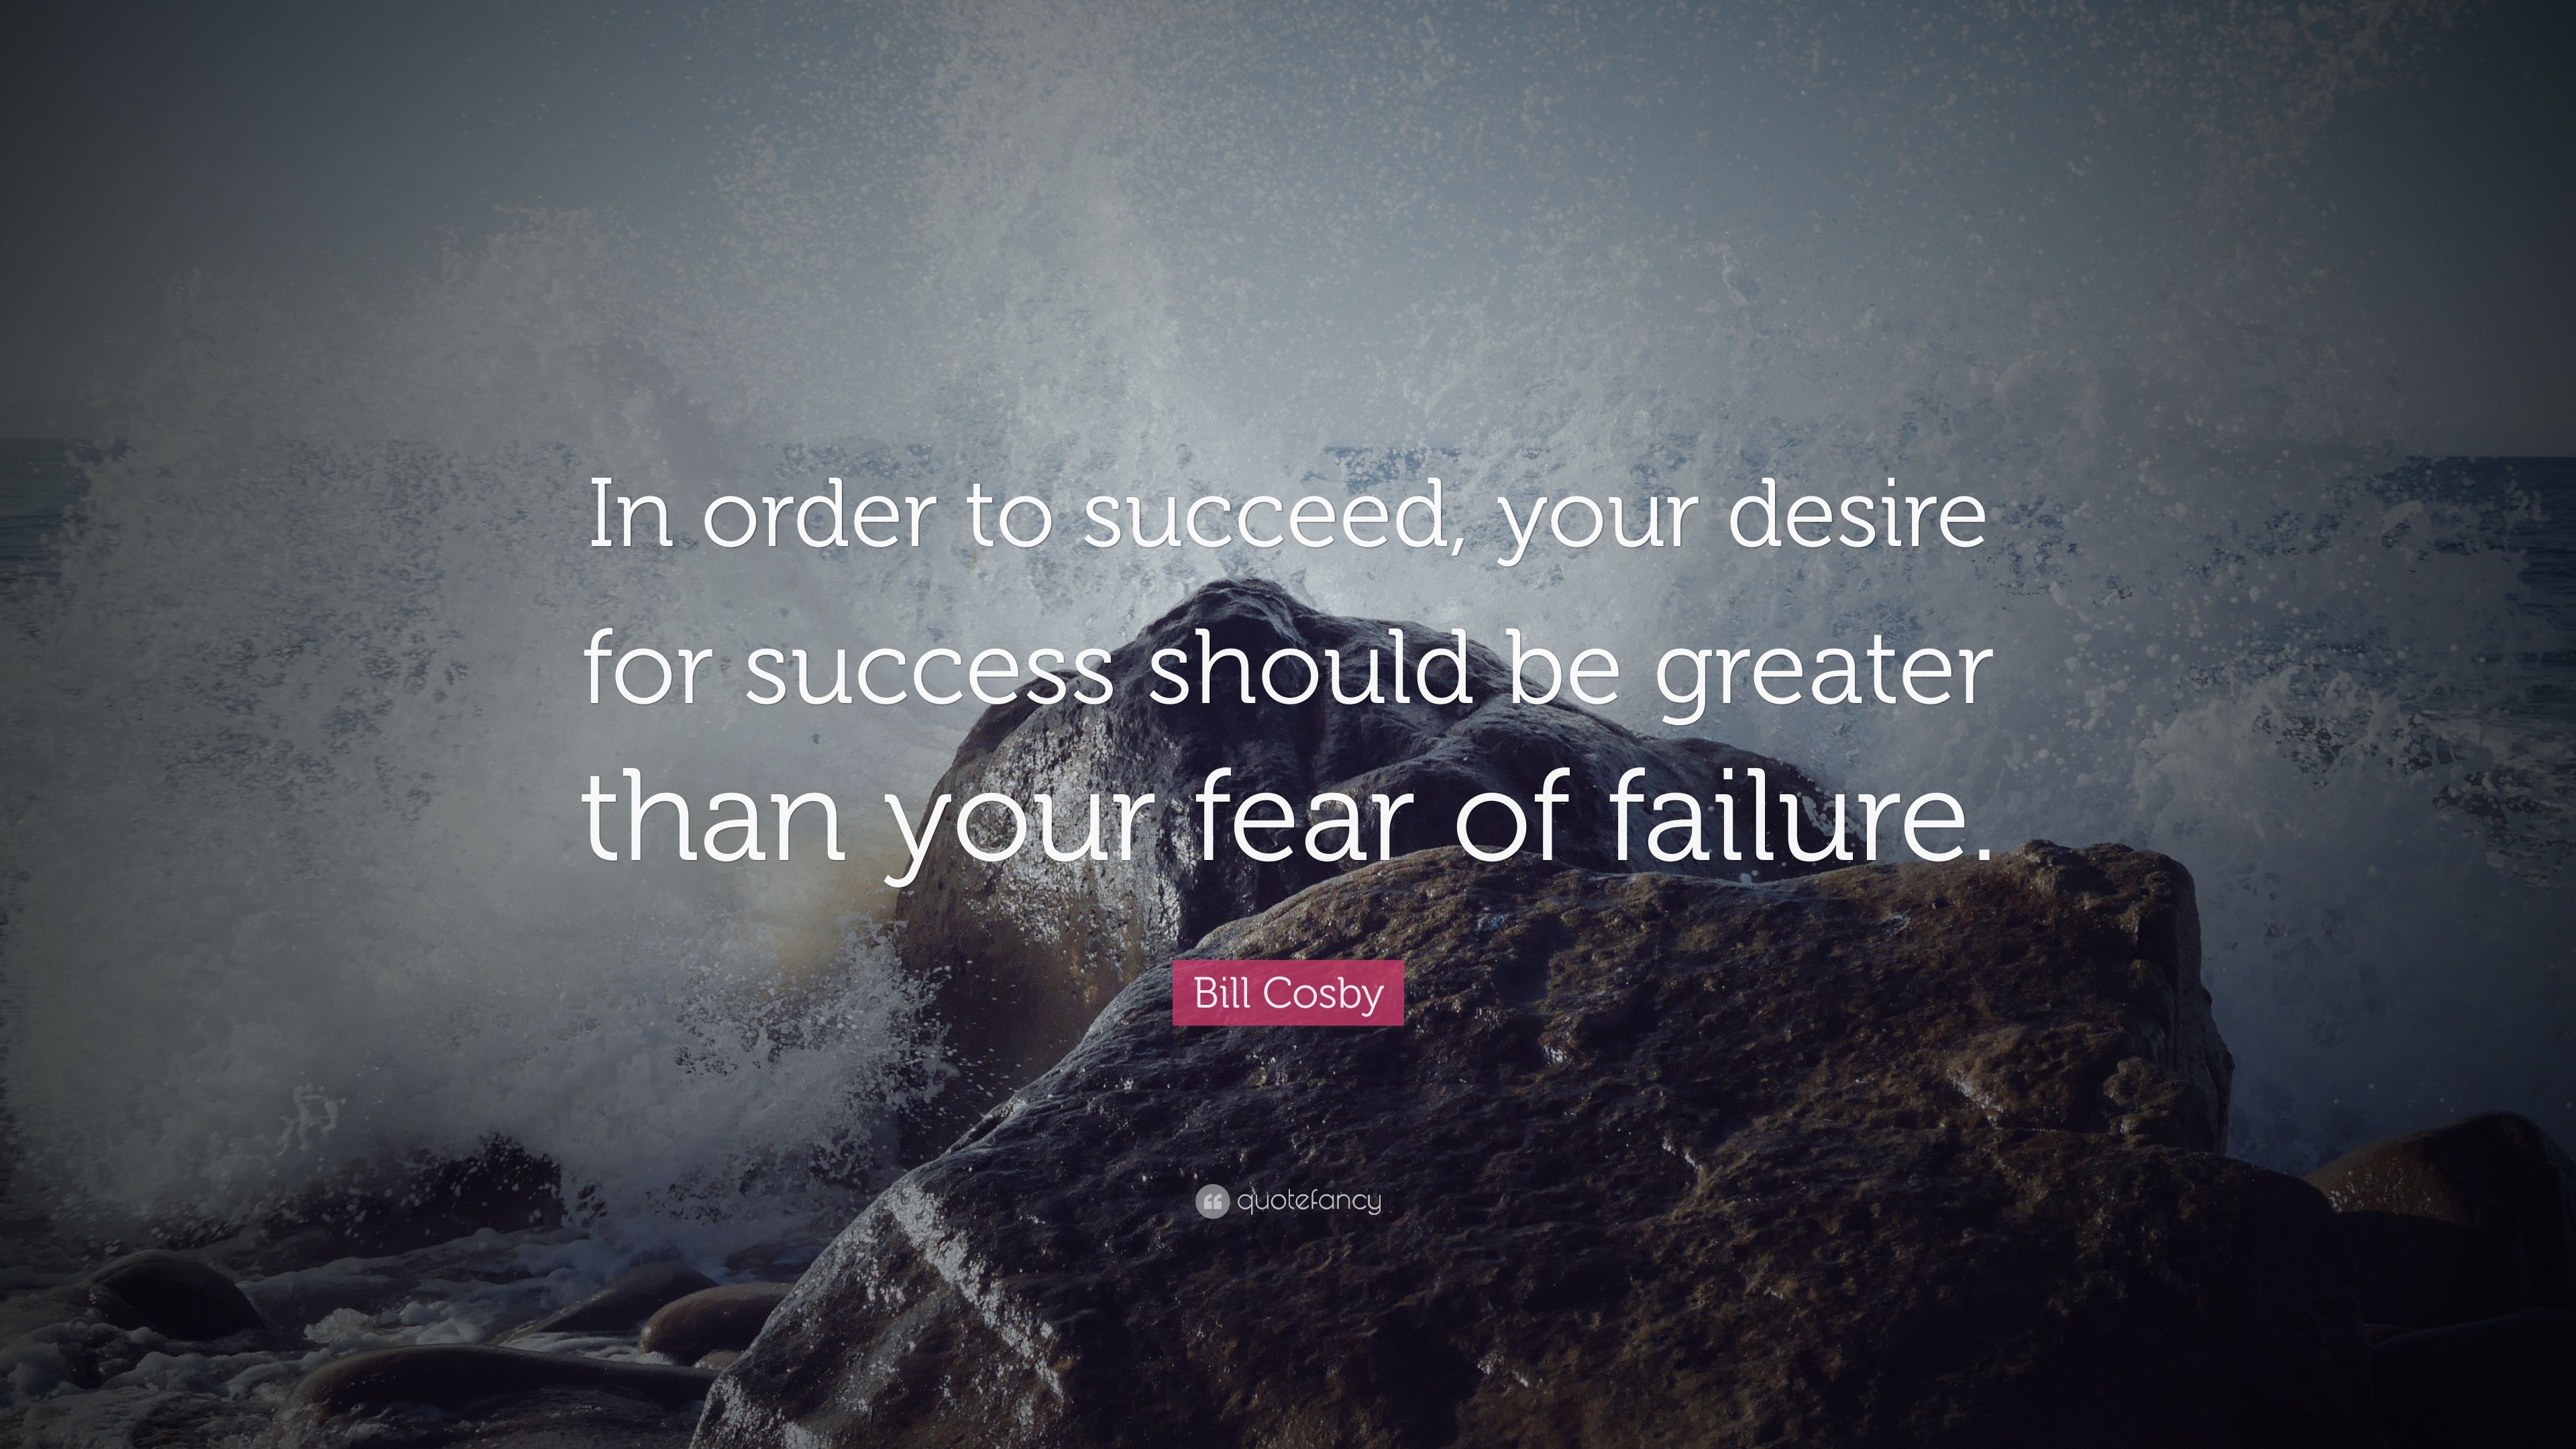 Bill Cosby Quote: “In order to succeed, your desire for success should be greater than your